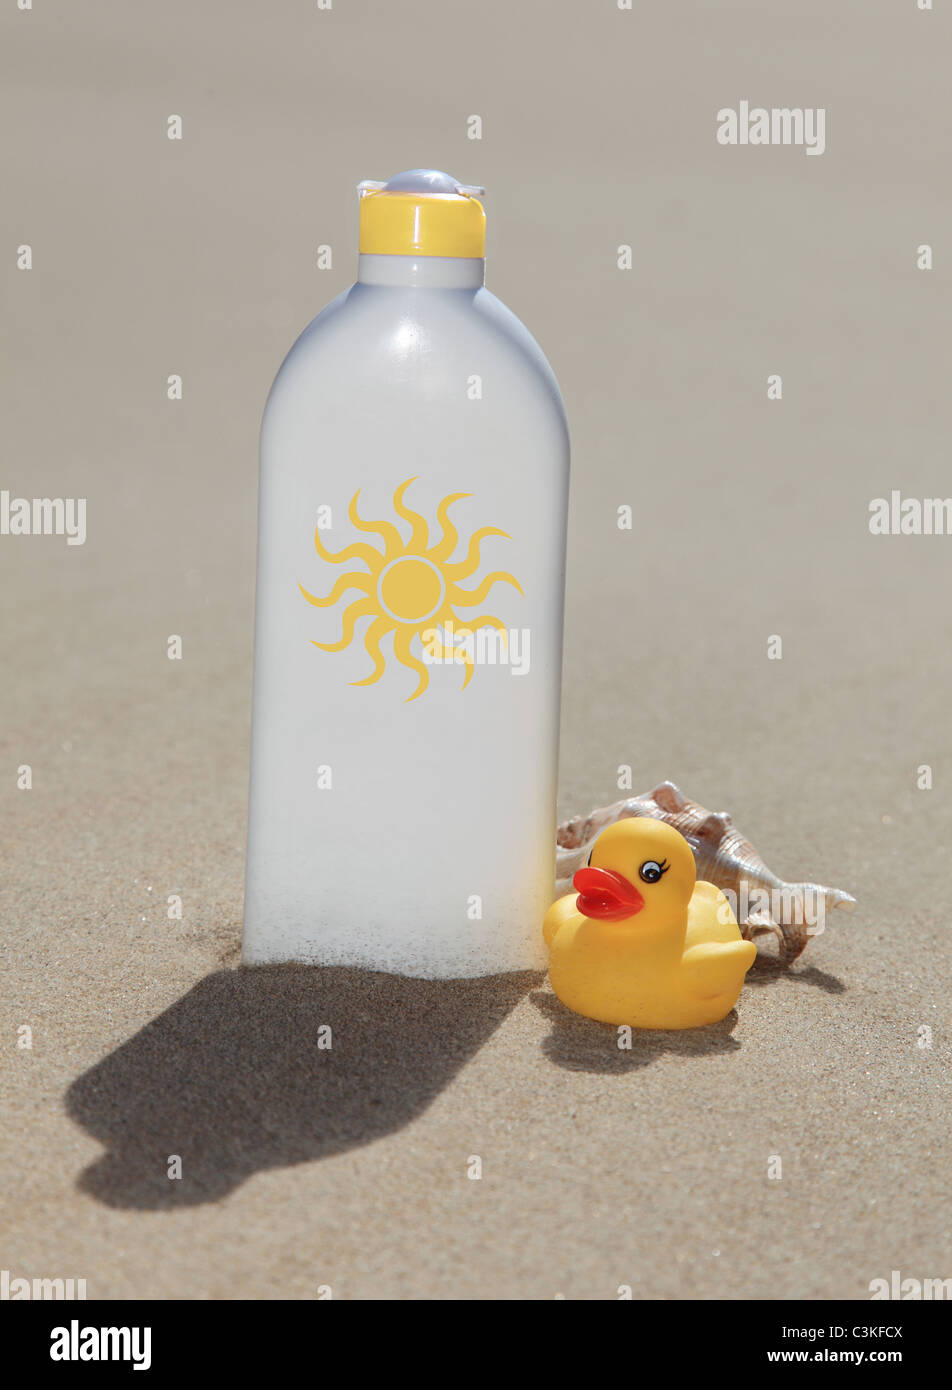 A bottle with suntan lotion standing in the sand. Stock Photo